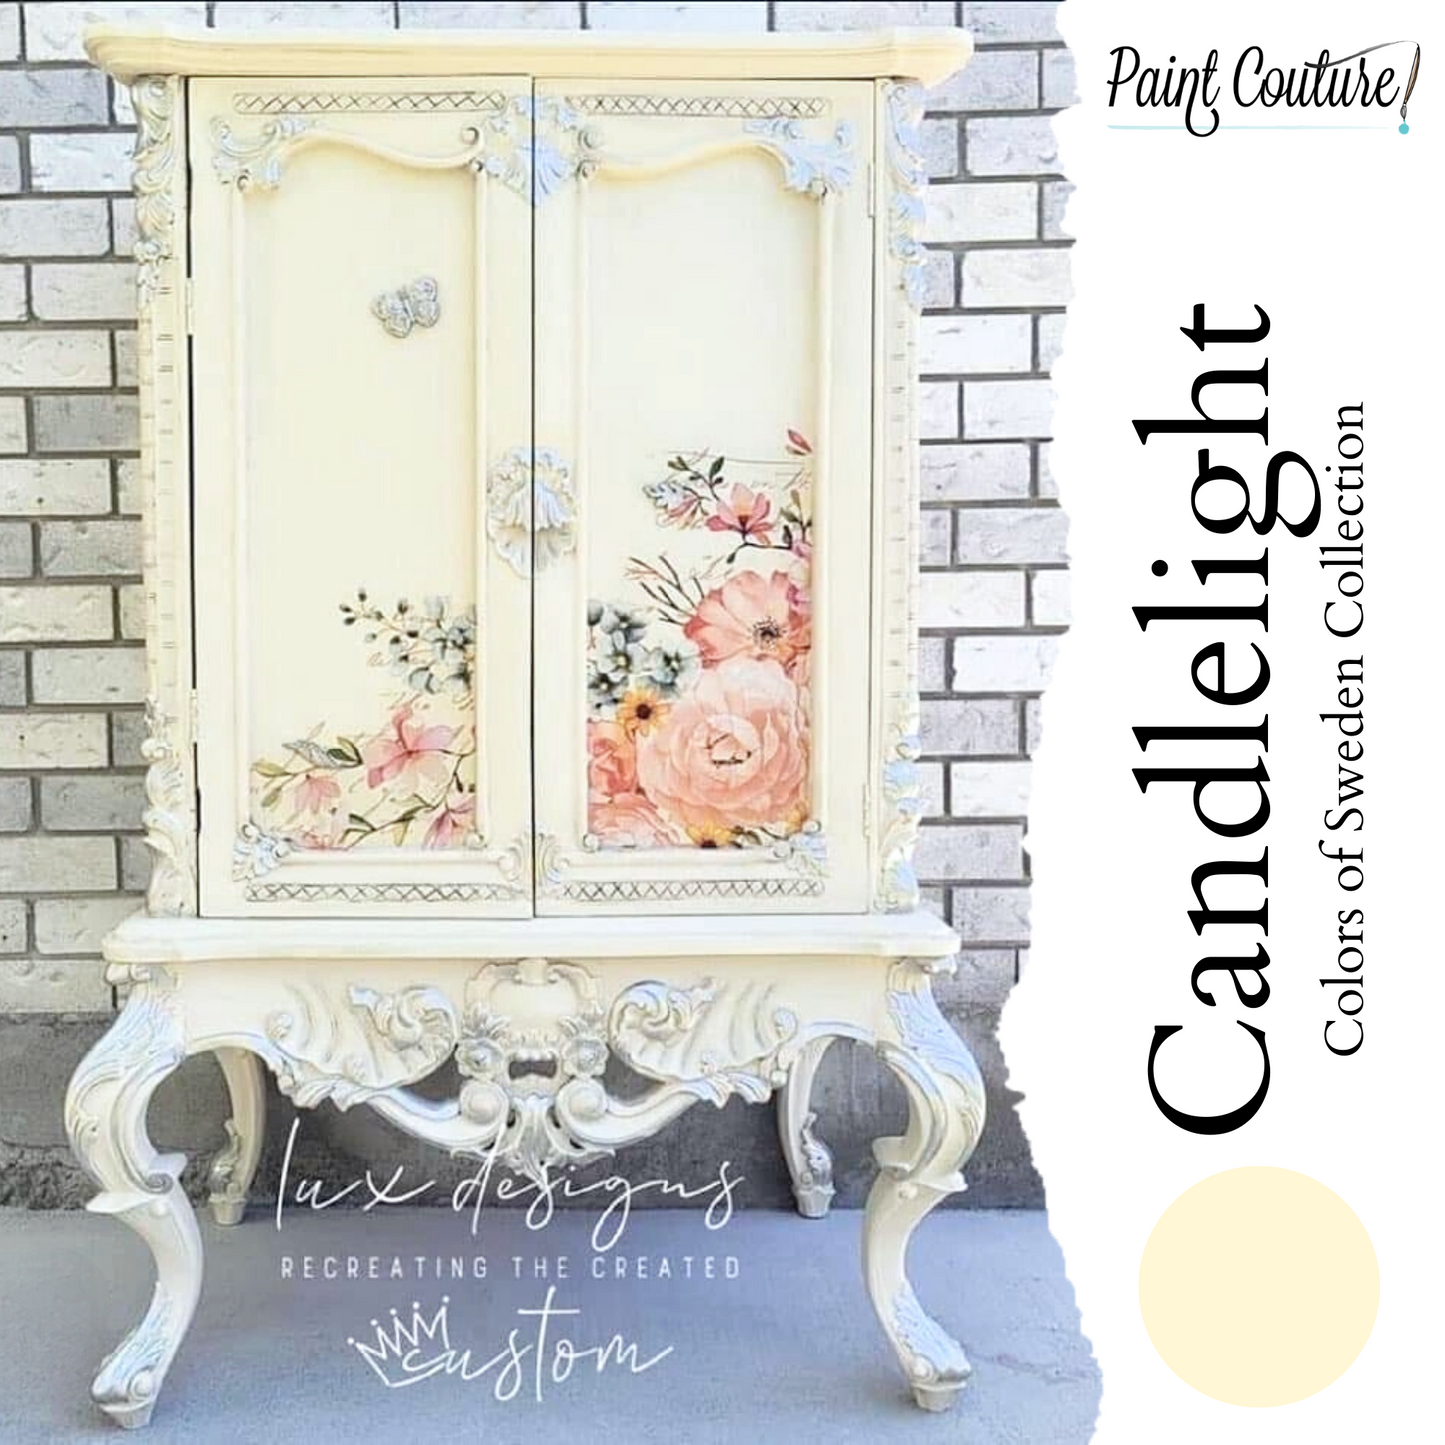 Paint Couture Candlelight - Acrylic Mineral Paint with a Flat Finish!